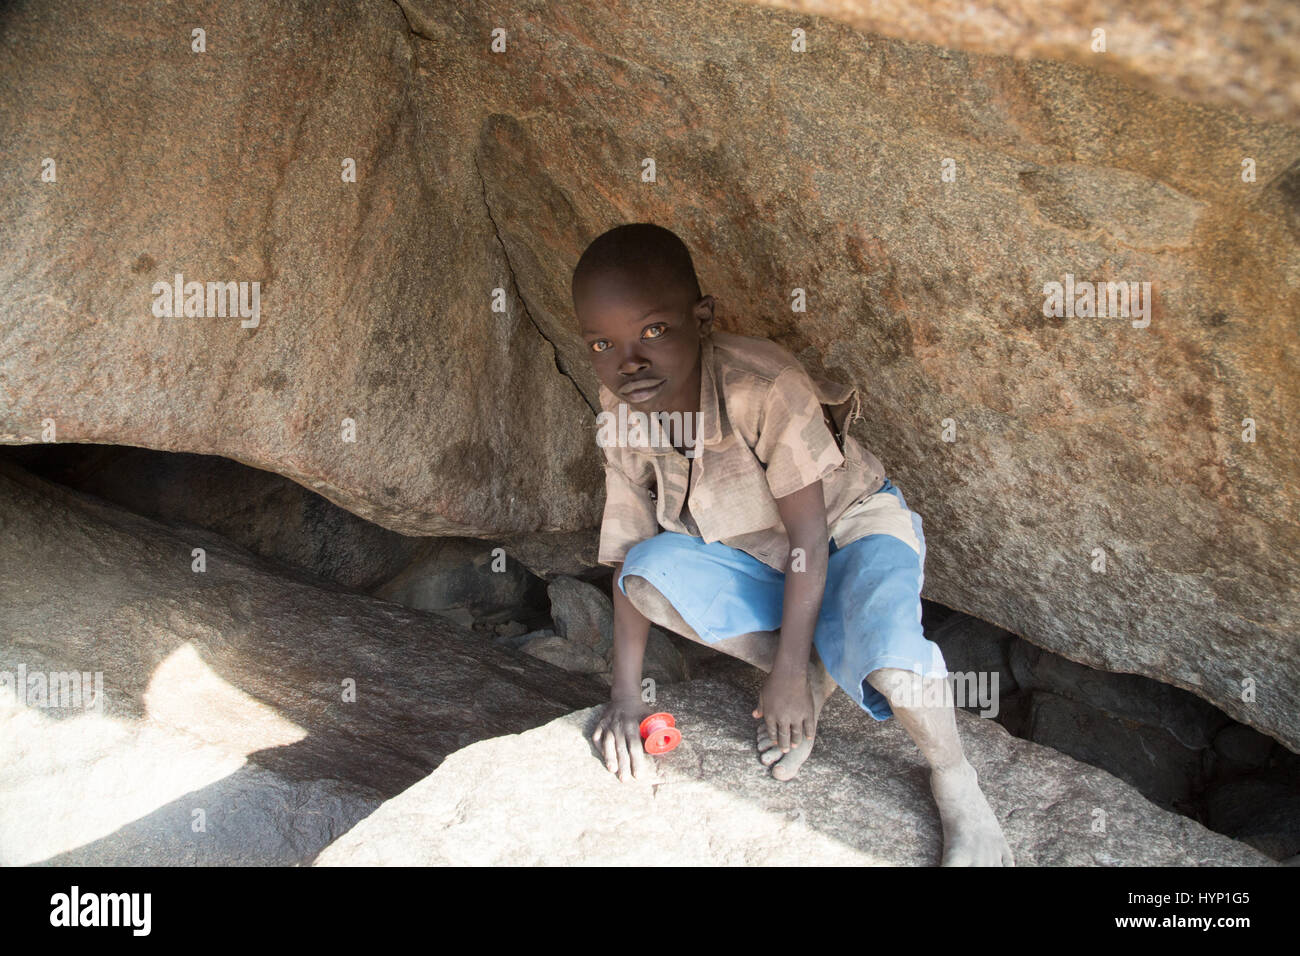 Kauda, Sudan. 12th Feb, 2017. A boy hides in a cave near Kauda, Sudan, 12 February 2017. The caves offer the population a refuge from the government's air force, which regularly conducts bombing raids using Soviet Antonov planes. The mountains are controlled by the national liberation army Sudan People's Liberation Army-North (SPLA-N) and its political arm, the Sudan People's Liberation Movement-North (SPLM-N). Photo: Laura Wagenknecht/dpa/Alamy Live News Stock Photo